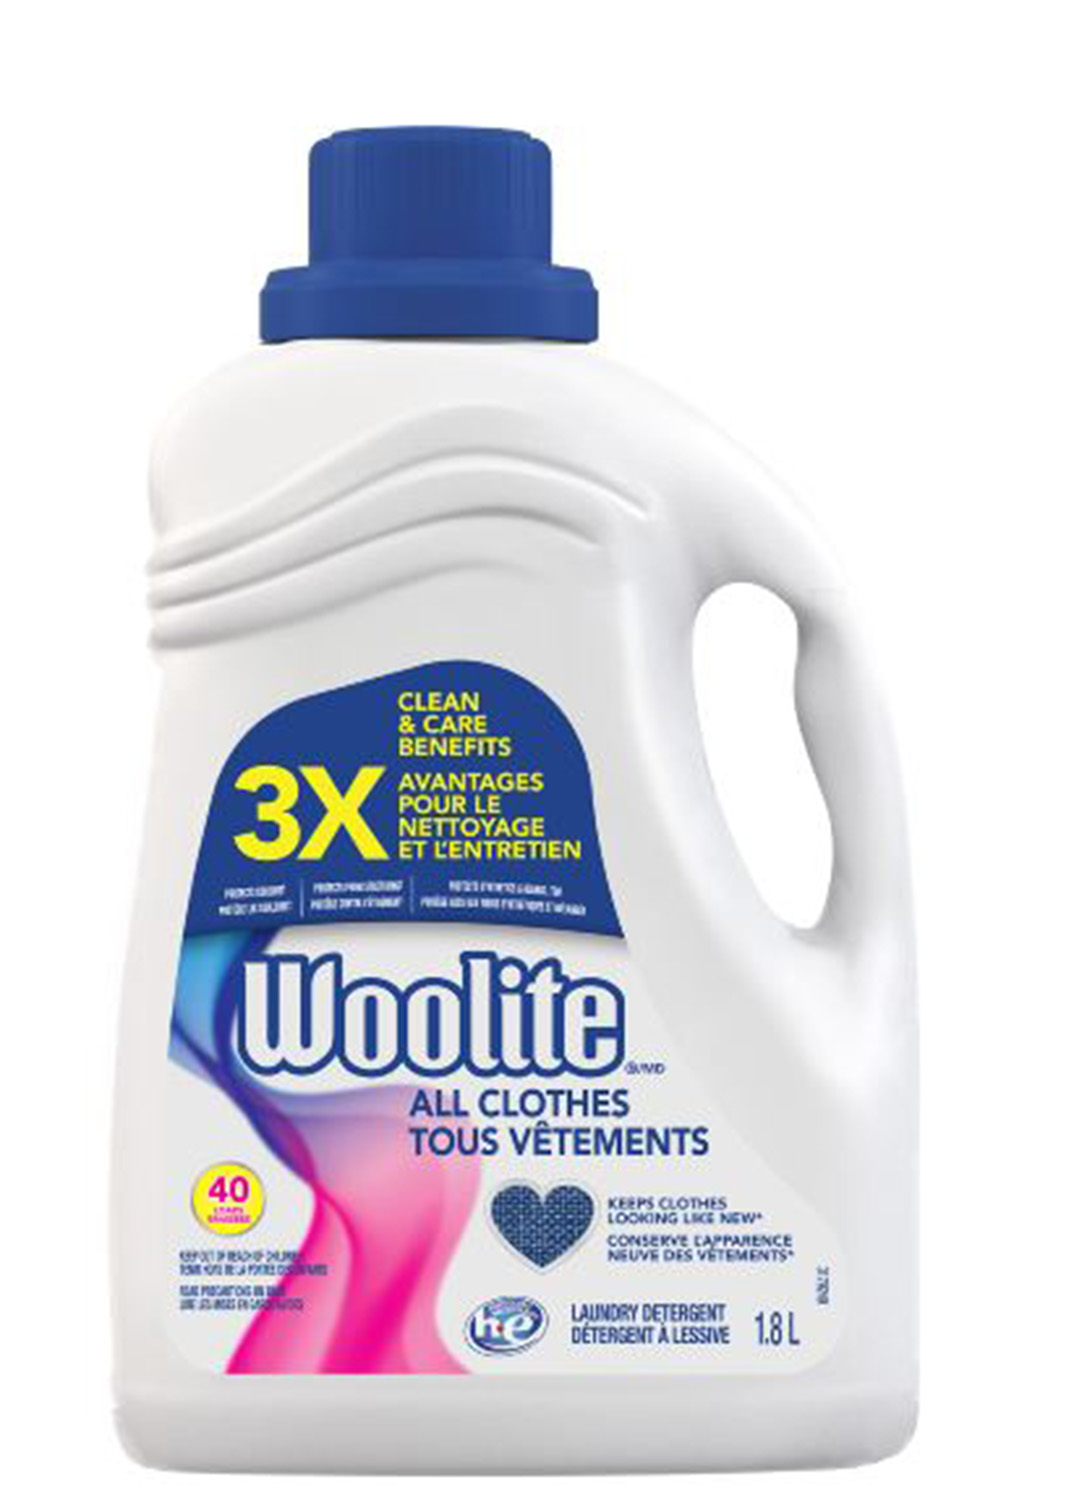 WOOLITE All Clothes Laundry Detergent Canada